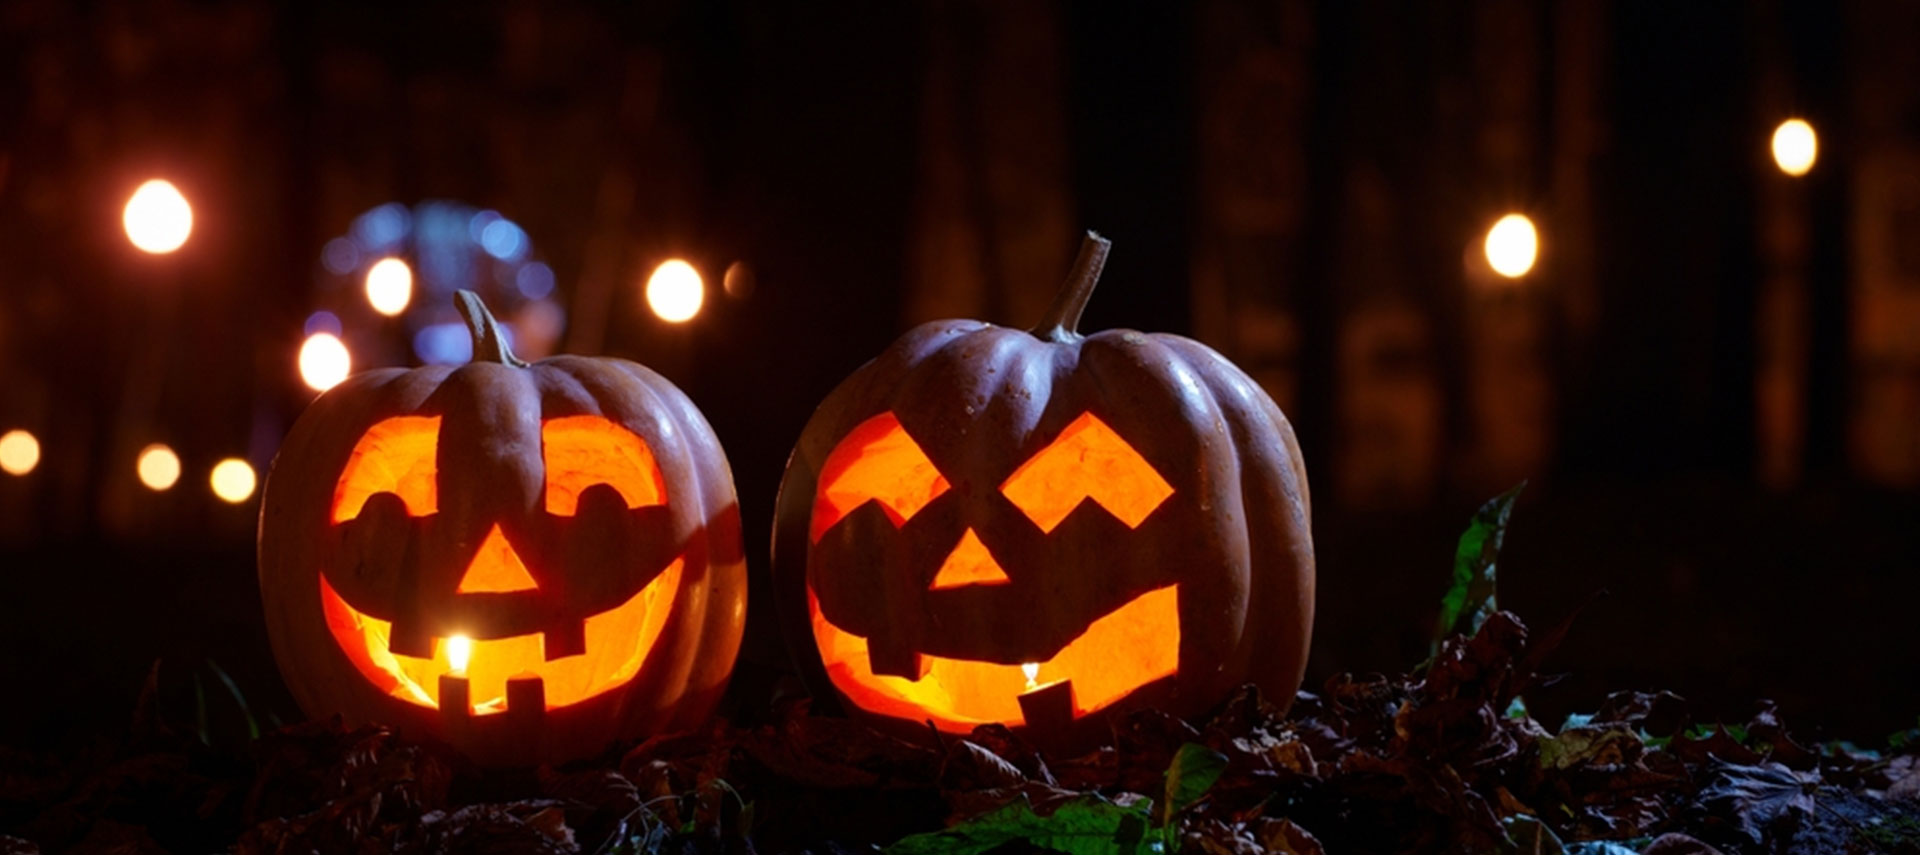 5 Ideas to Make Your Halloween Event Stand Out